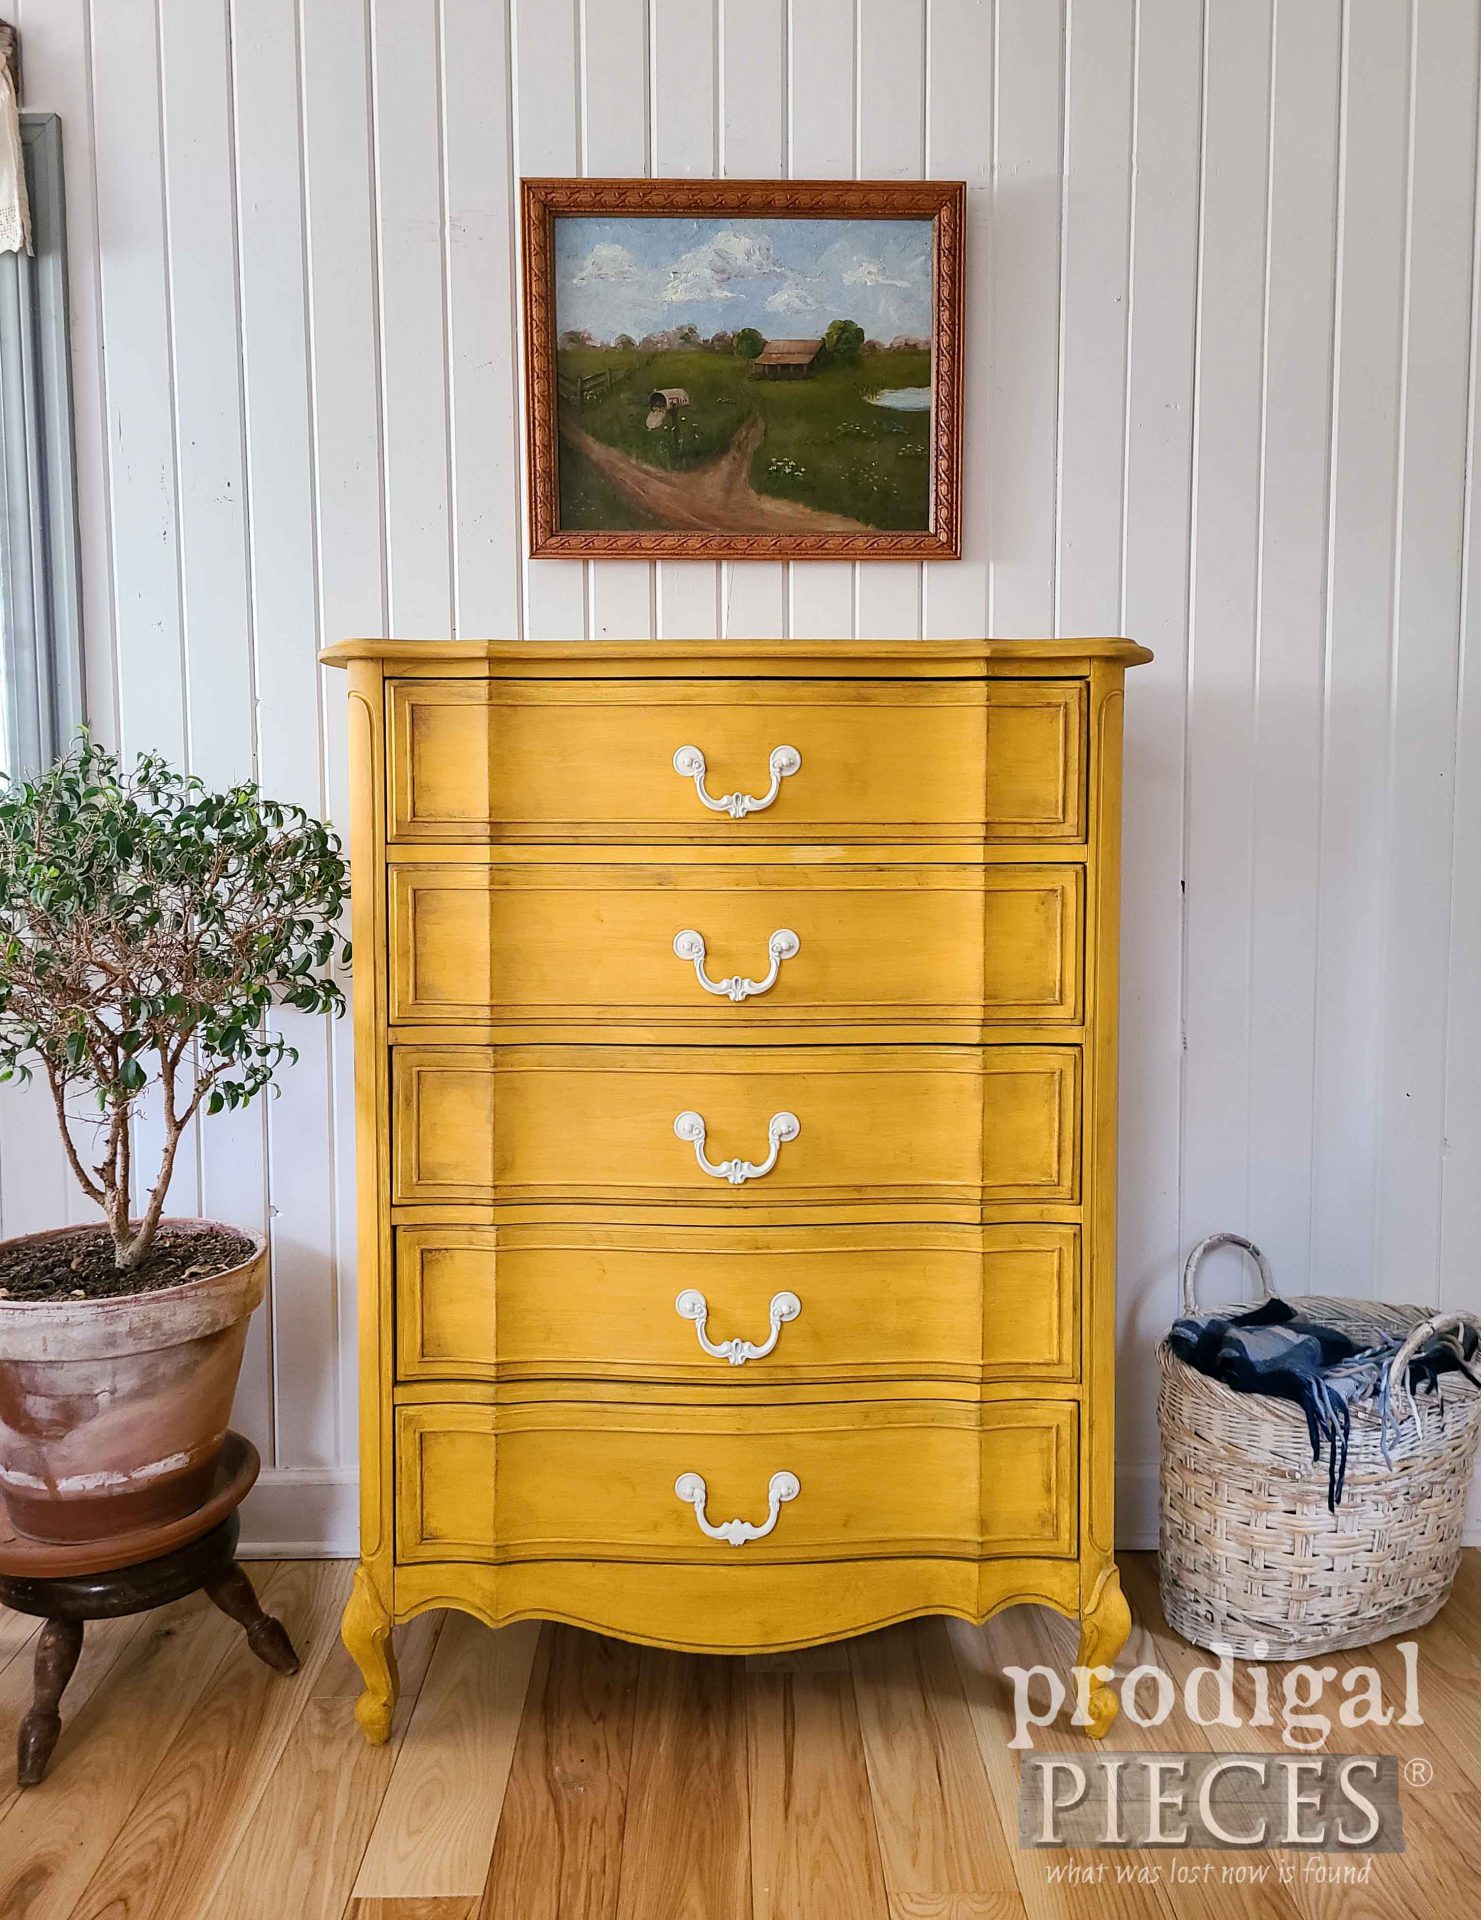 Vintage Yellow French Provincial Chest of Drawers by Larissa of Prodigal Pieces | prodigalpieces.com #prodigalpieces #vintage #yellow #furniture